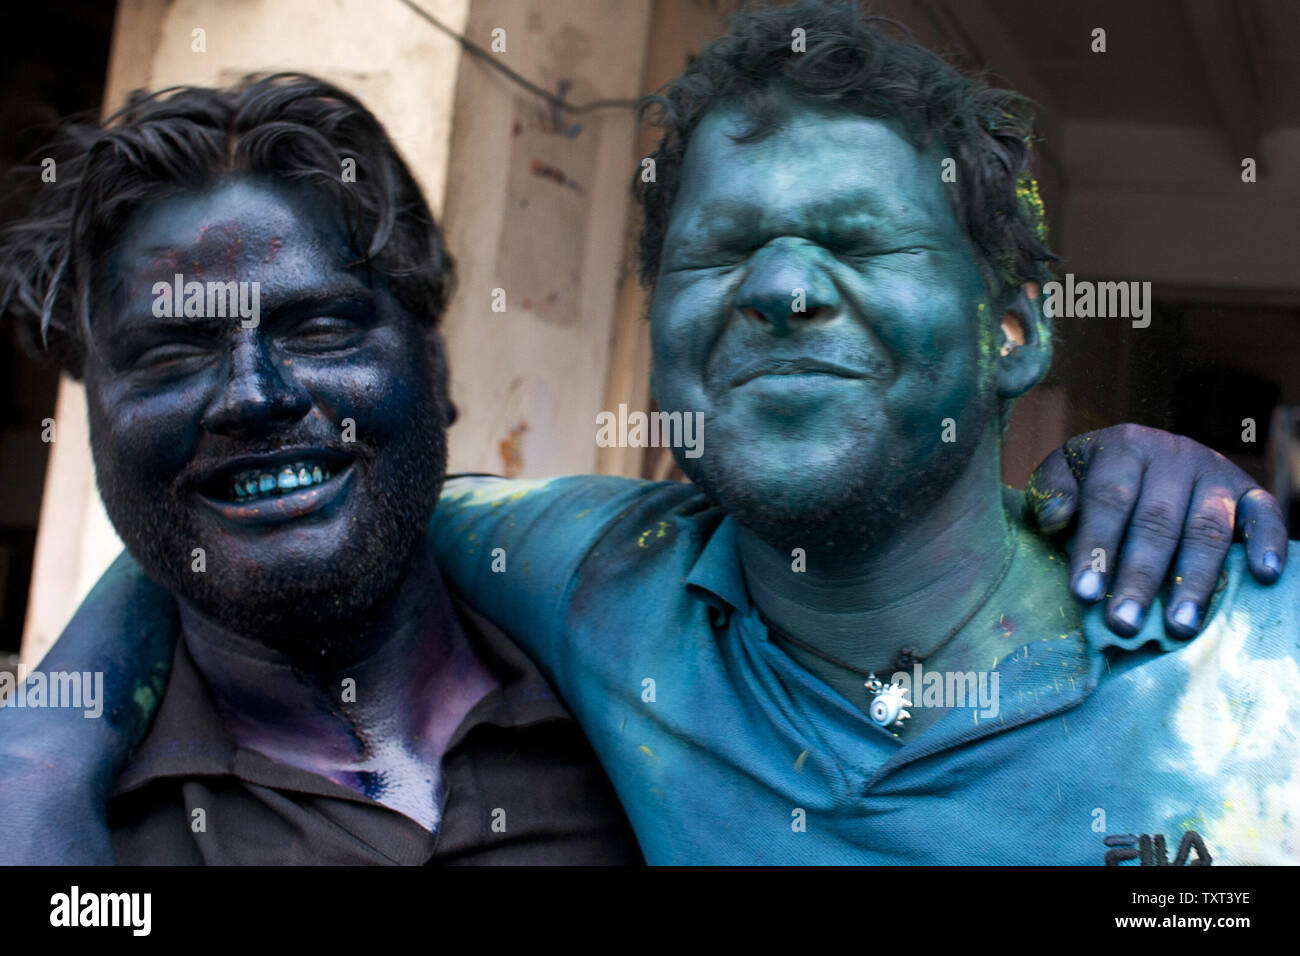 Hindu devotees celebrate 'Holi,' the festival of color, at the Bankey Bihari Temple on March 21, 2011 in Vrindavan, India. Holi is celebrated at the end of the winter season on the last full moon the lunar month Phalguna which usually falls in the later part of February or March.  UPI/Maryam Rahmanian Stock Photo